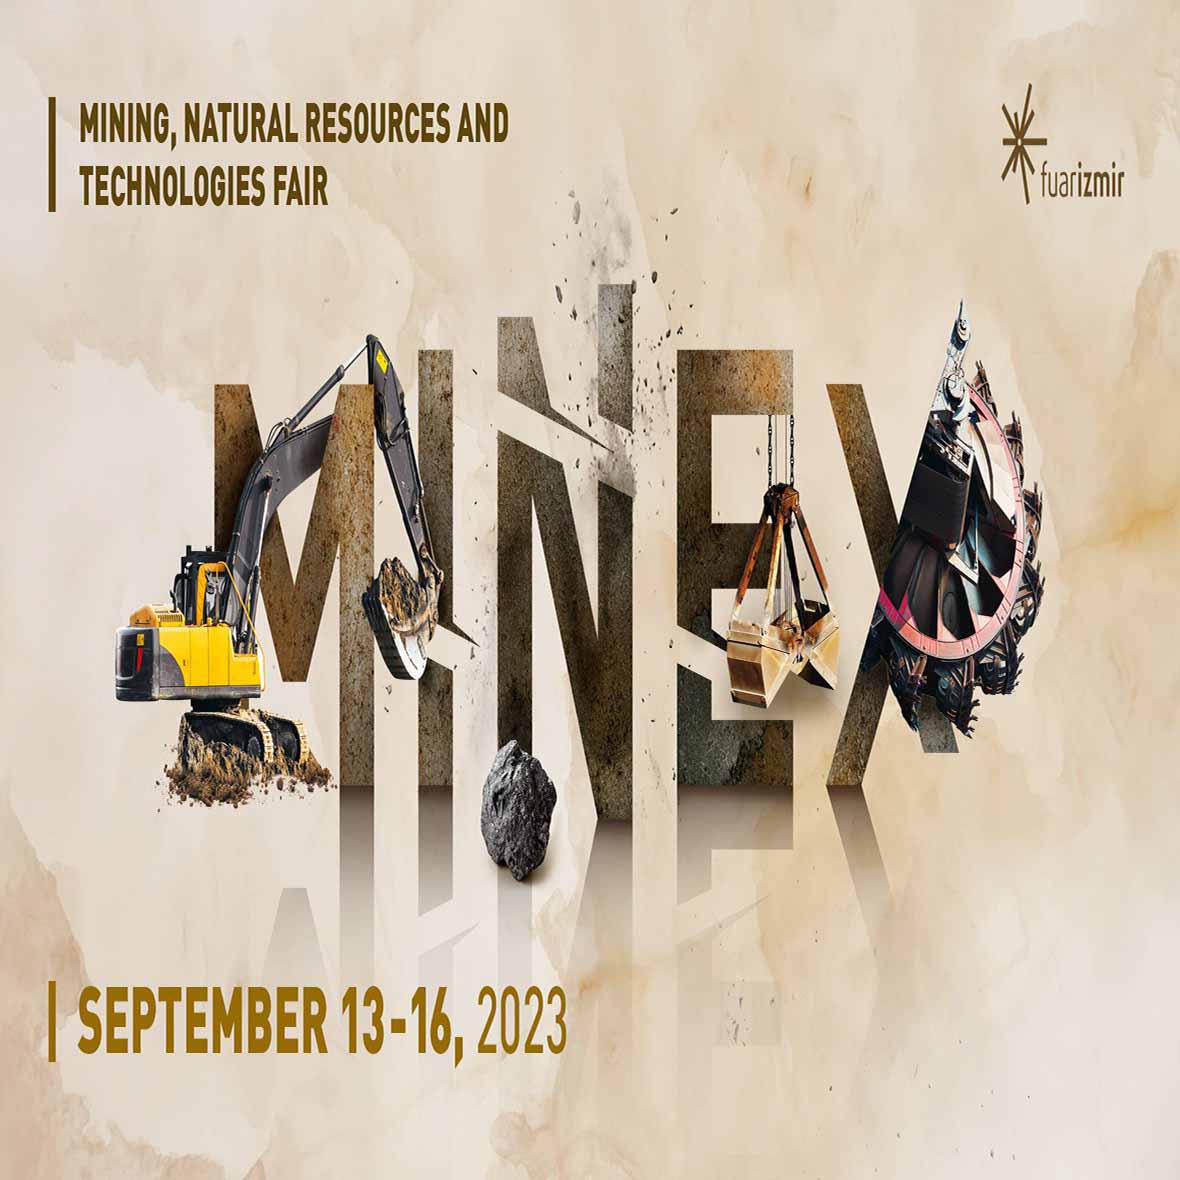 MINEX 2023 Mining, Natural Resources and Technology Exhibition